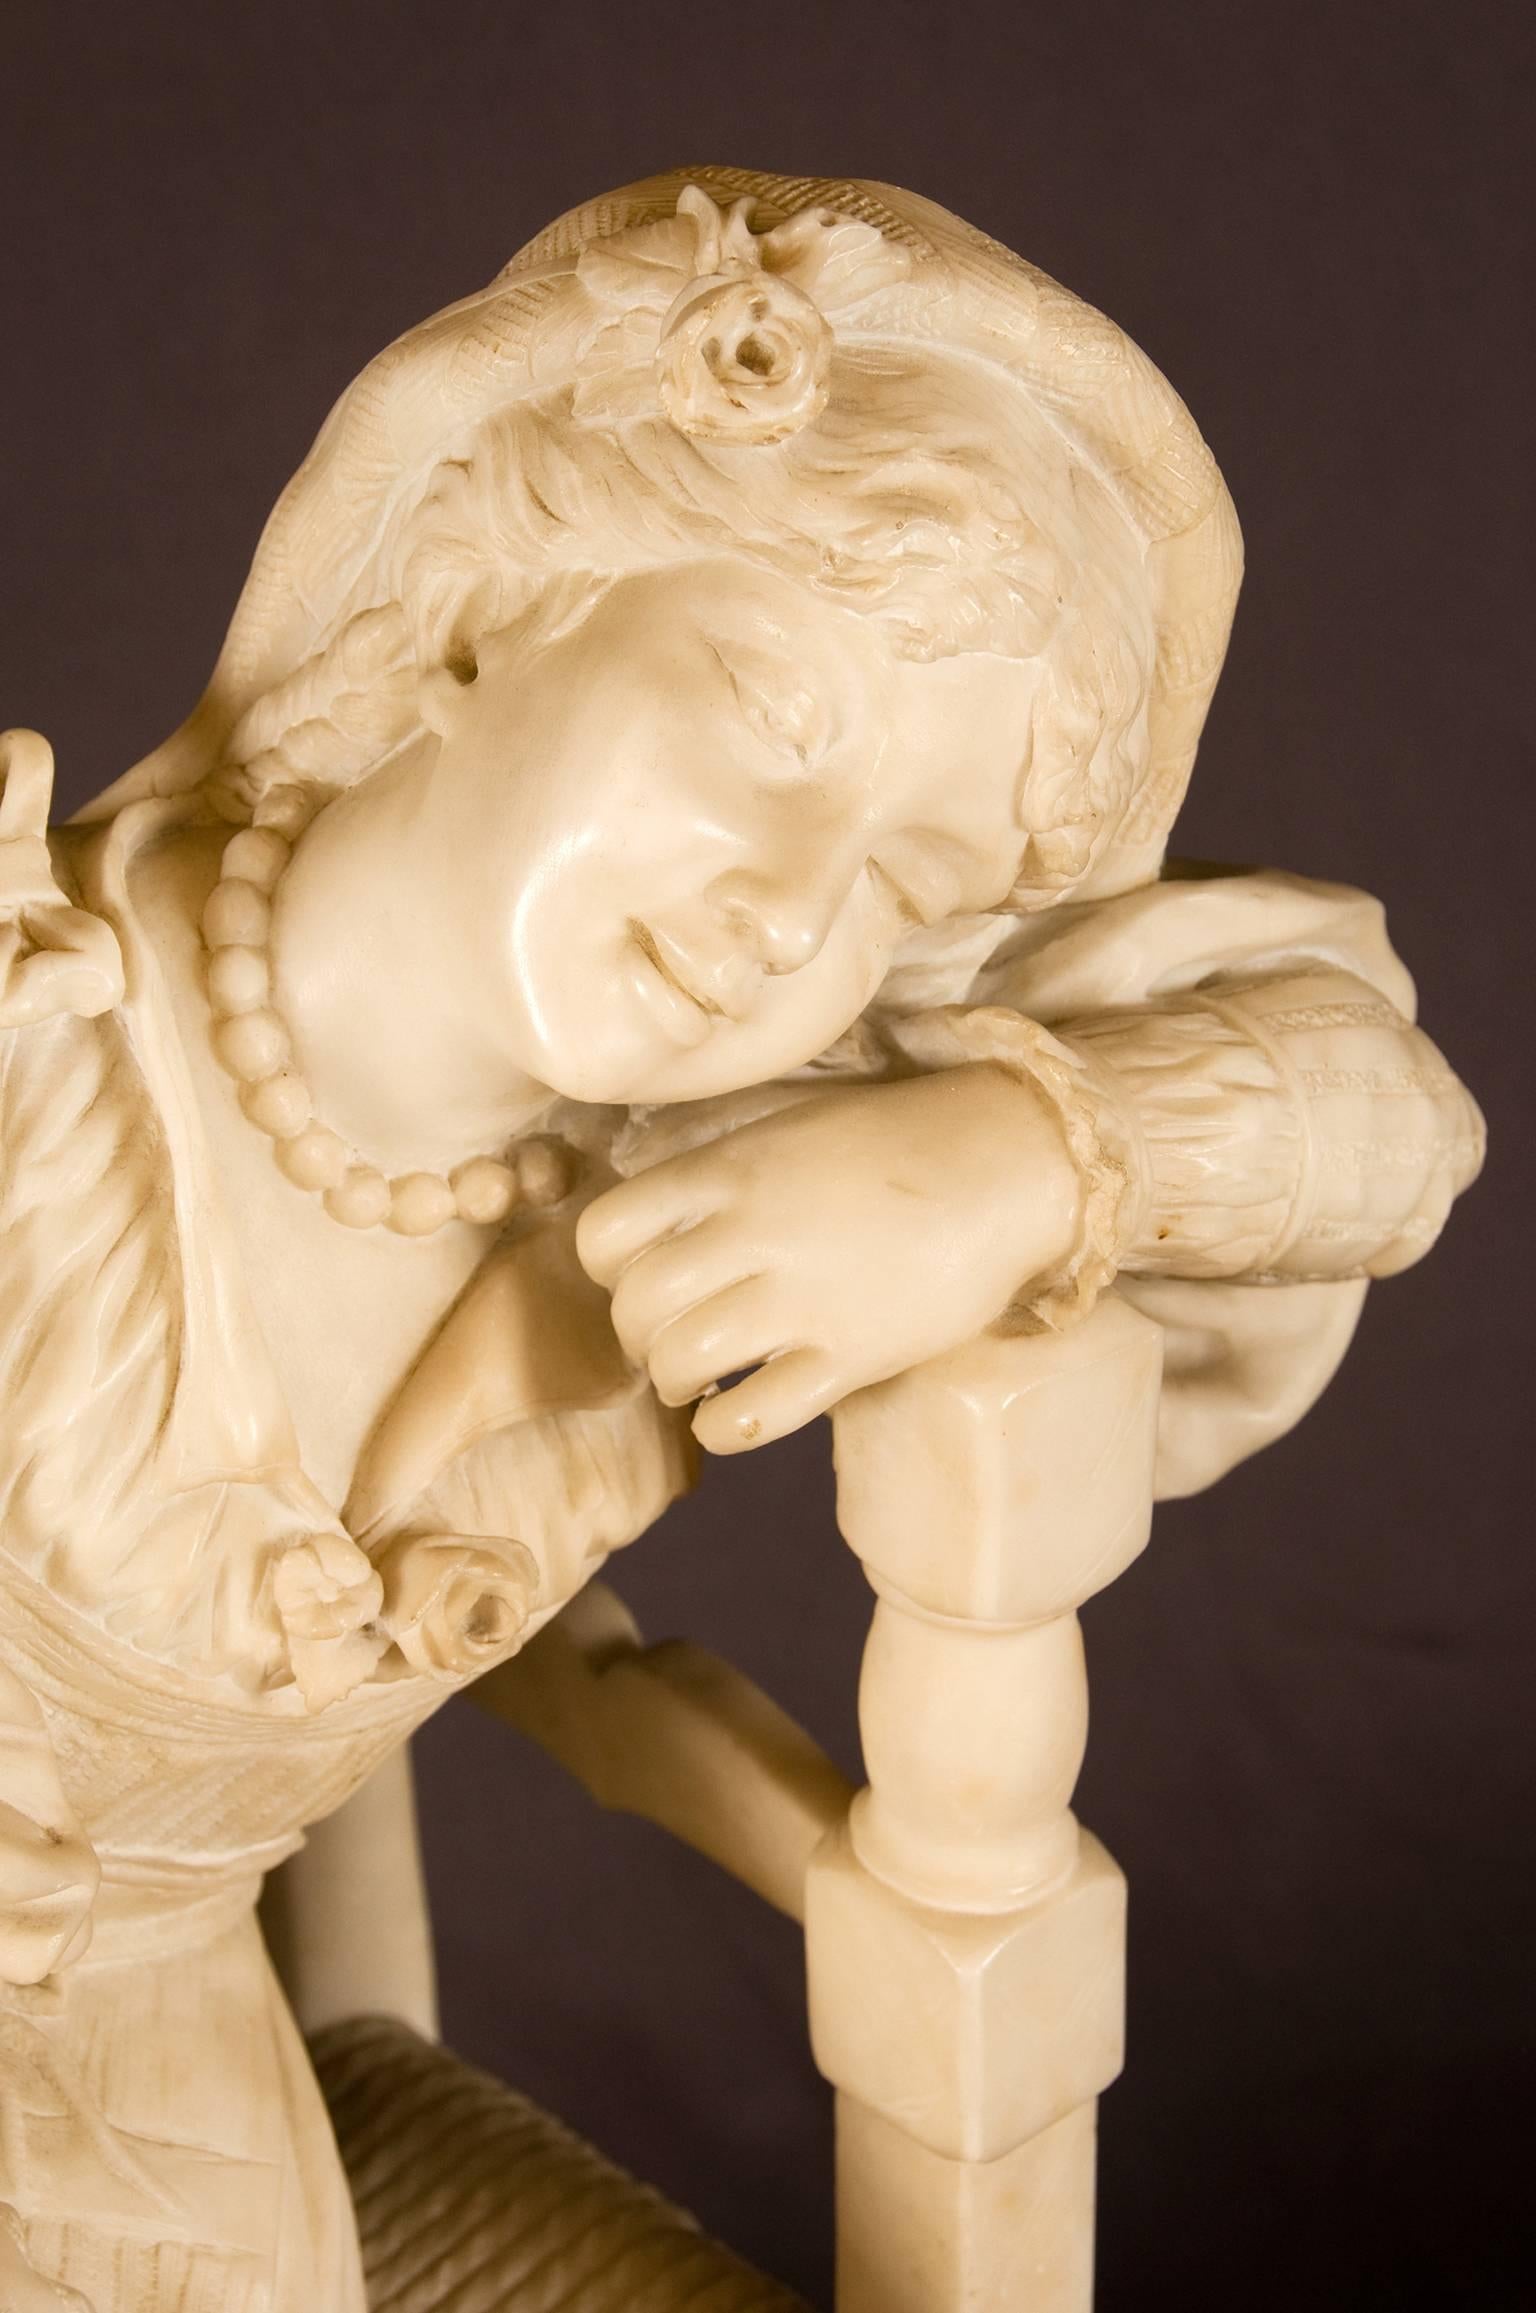 Lovely romantic Italian alabaster sculpture of a young girl seated in a cane chair listening to music, as she dreams away and holds a tambourine in her right hand. The beholder can almost see the tapping of her right foot to the rhythm of the music.